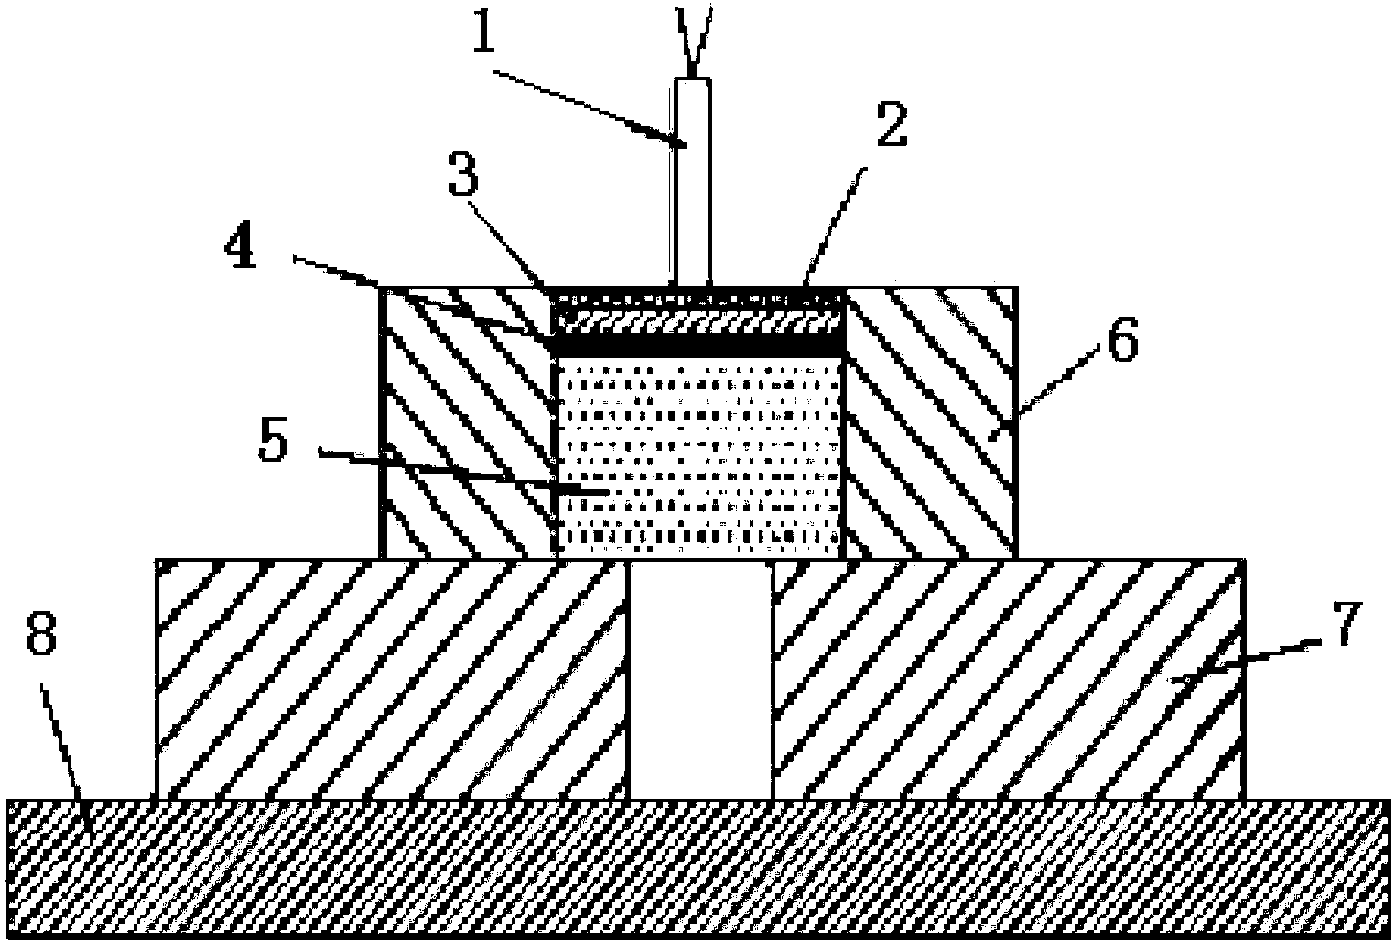 Composite loading test device for explosive blasting impact and shearing